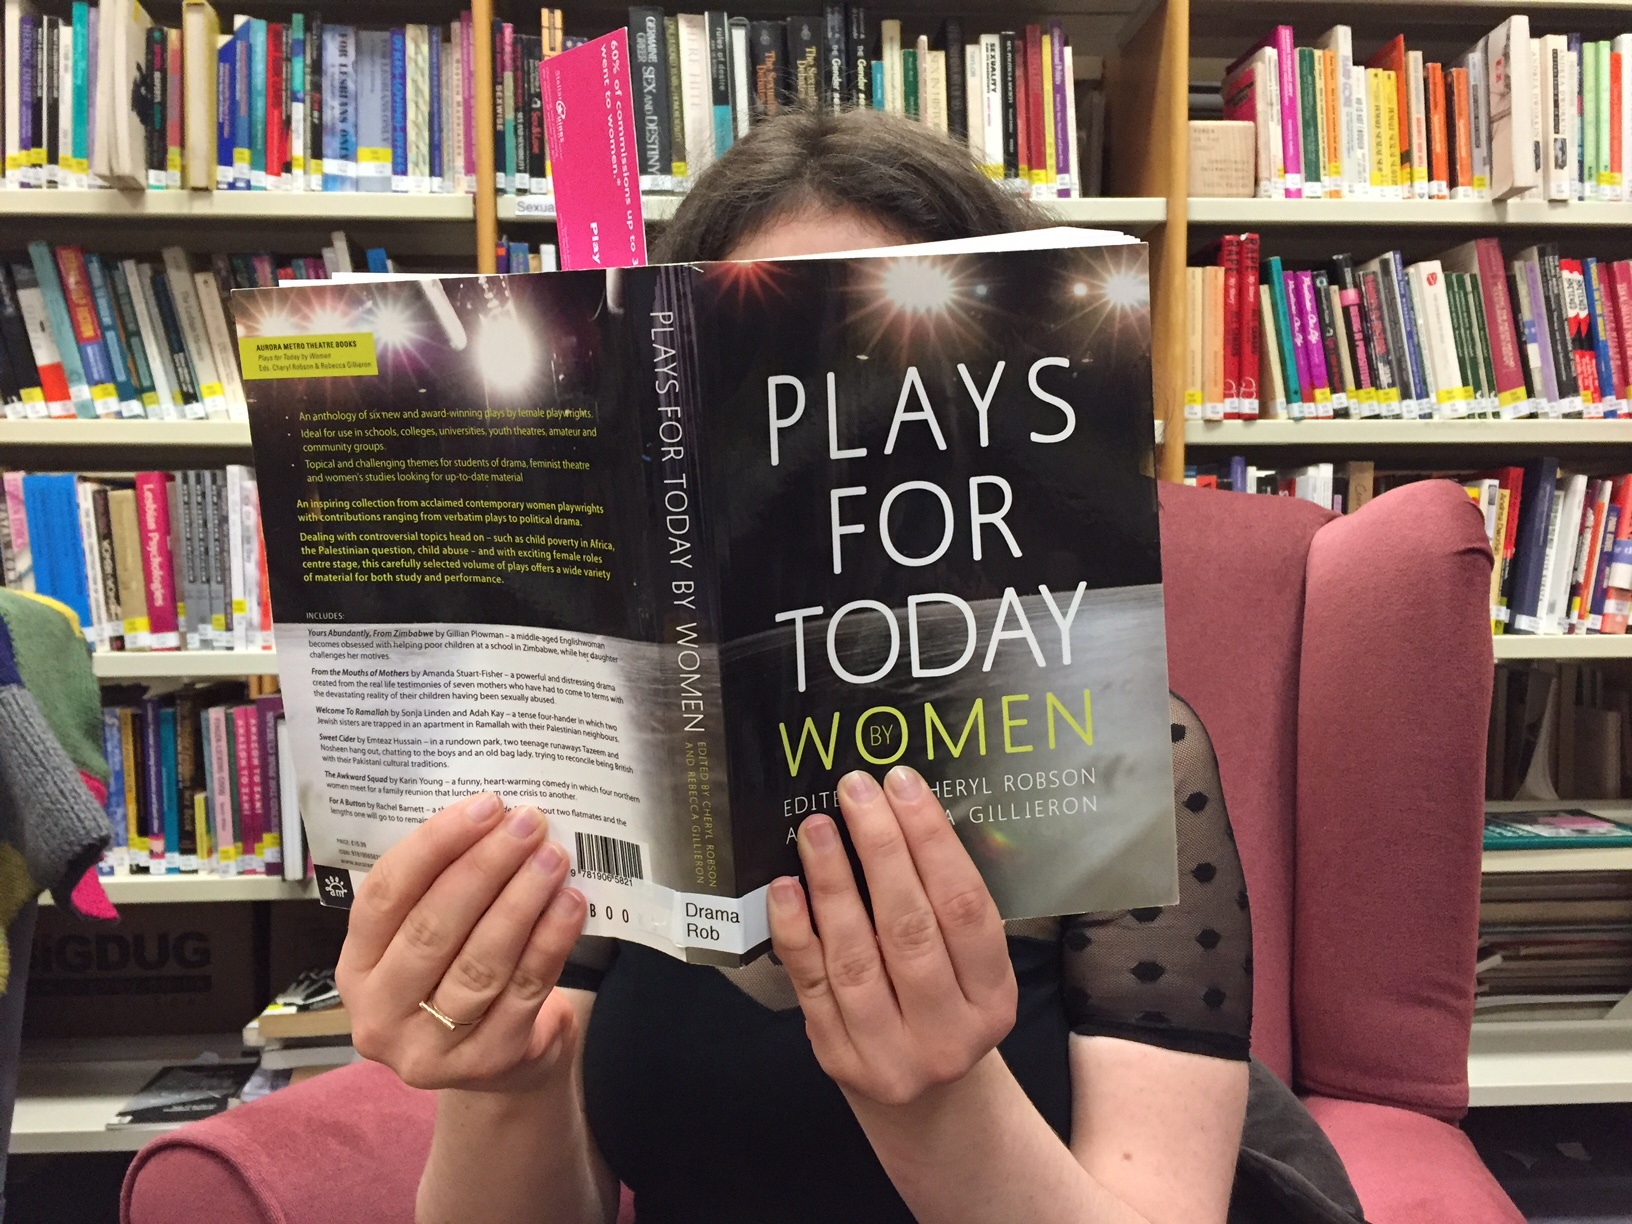 Photograph of person reading a book entitled 'Plays for Today: Women'. The person is sitting in a cosy chair in GWL with shelves of books visible in the background.